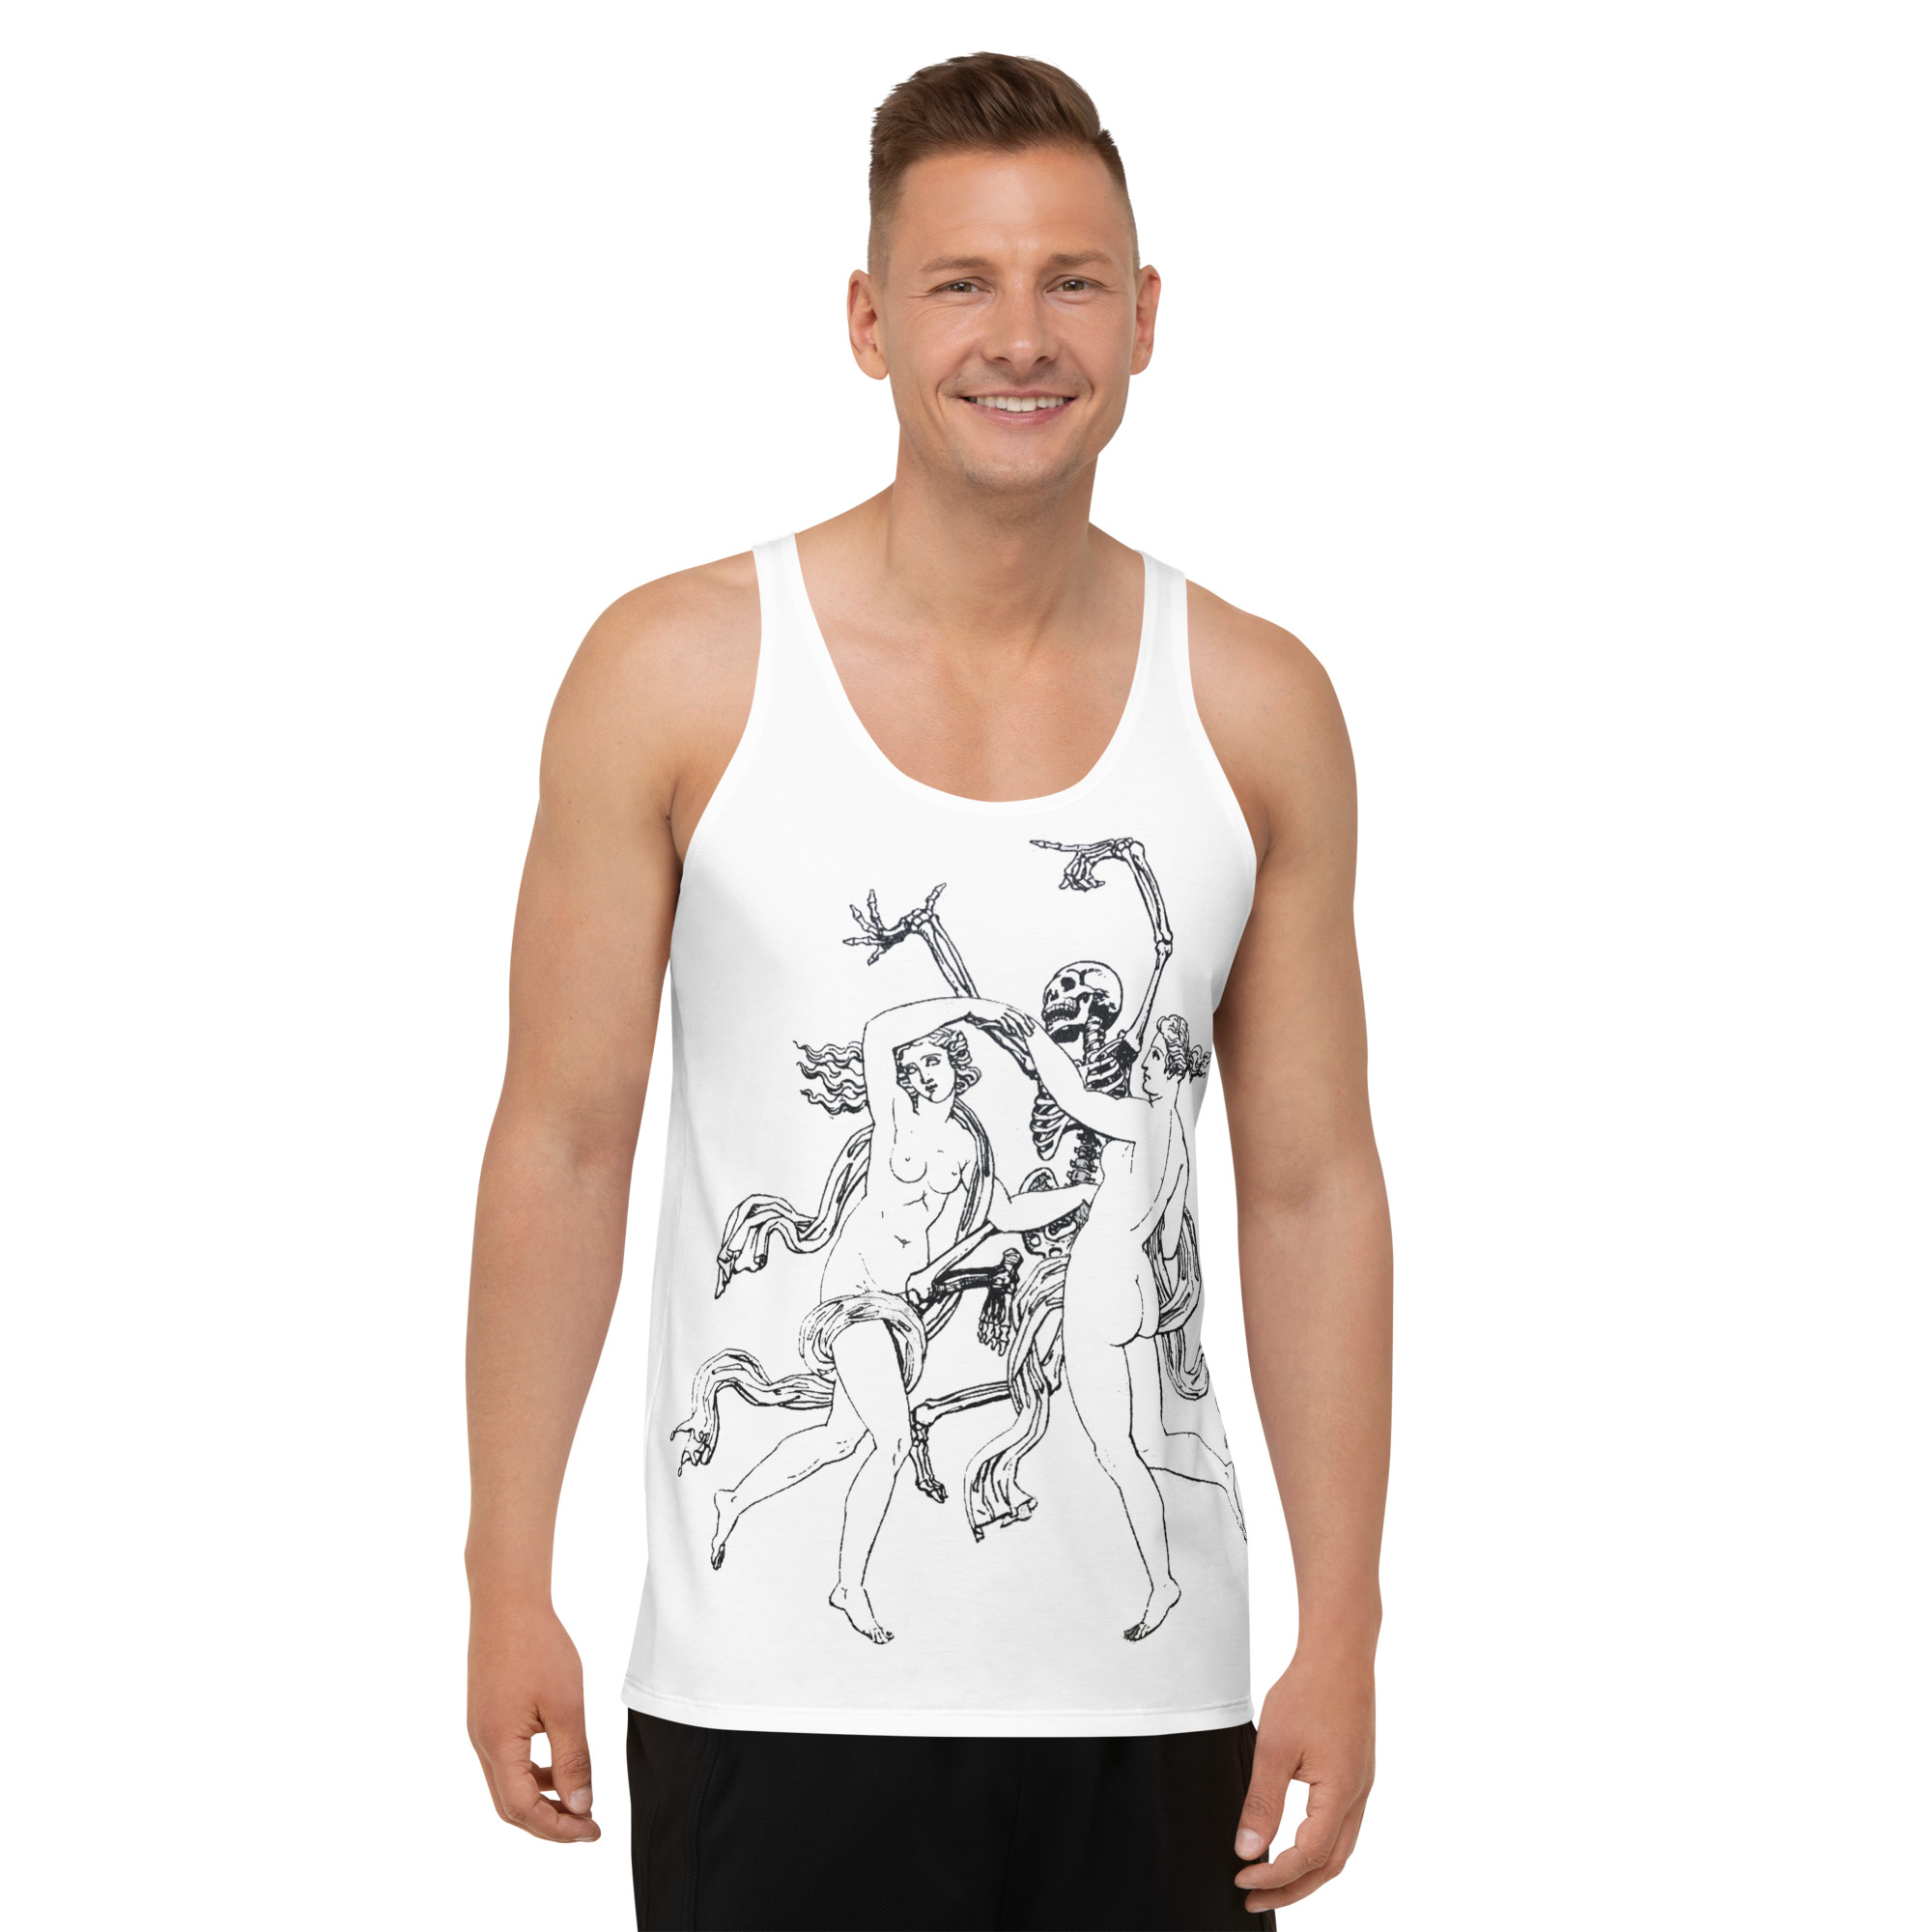 all-over-print-mens-tank-top-white-front-63656c6f410d2.jpg